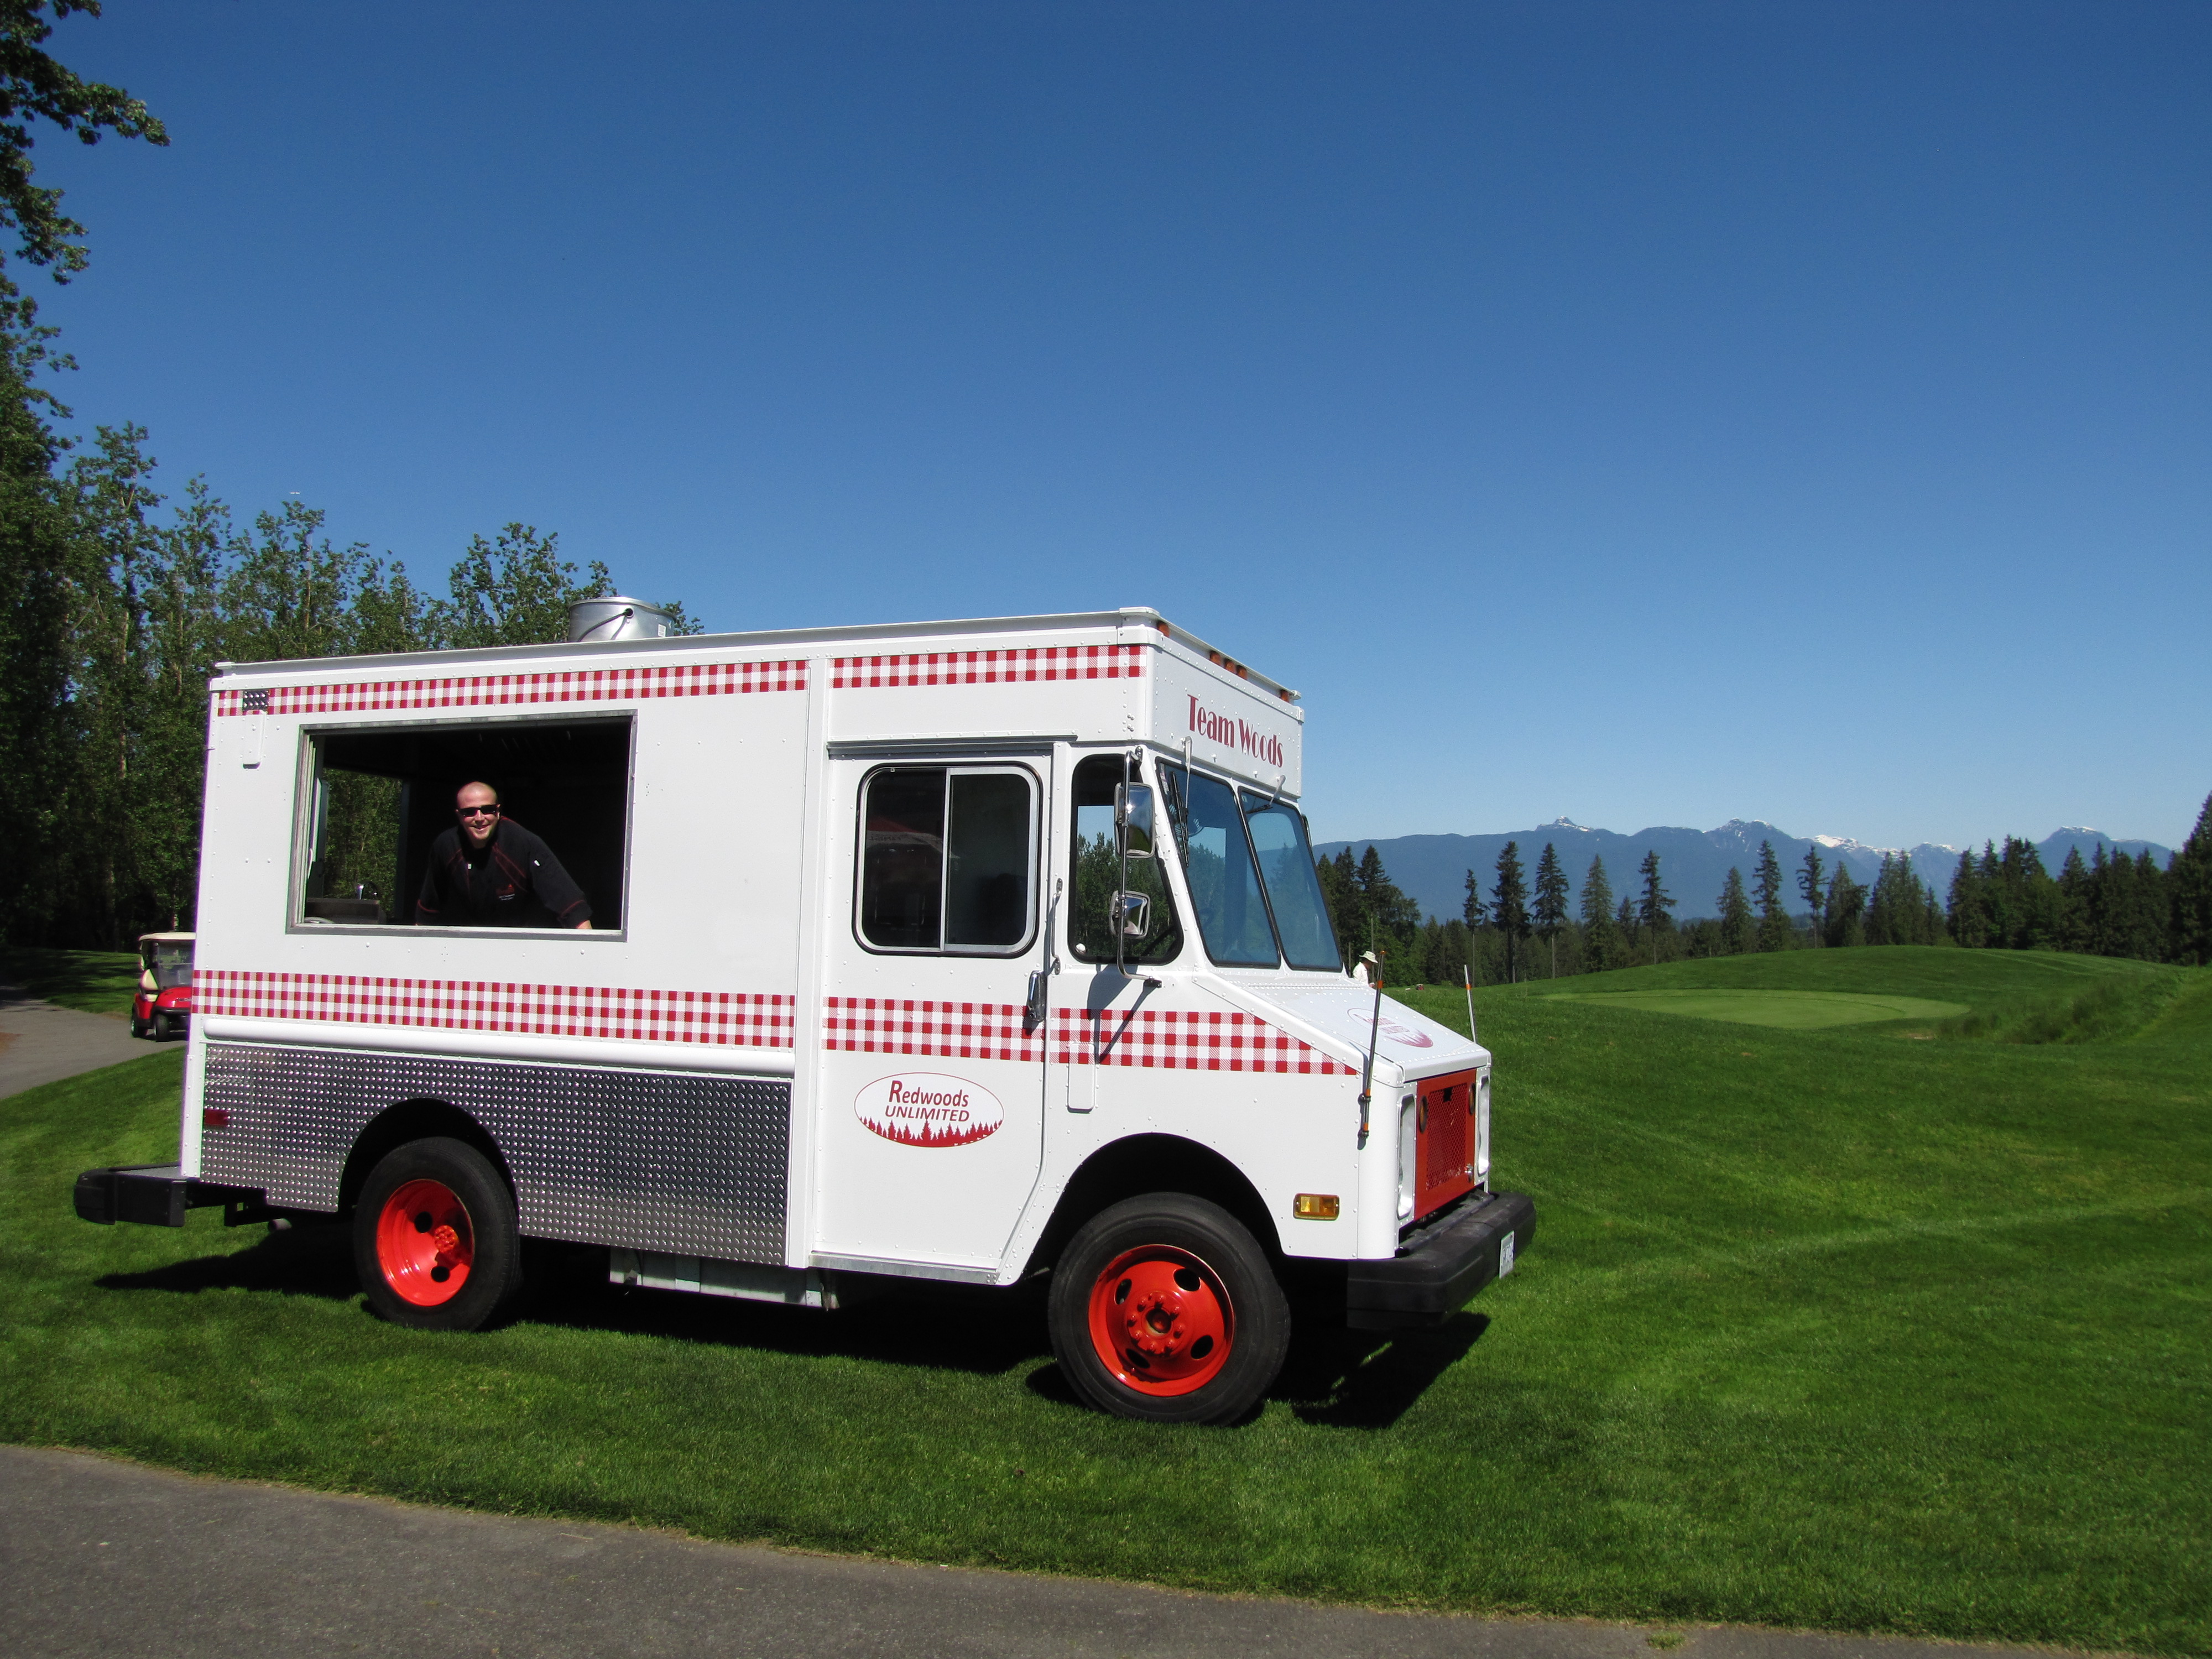 Golf course food truck